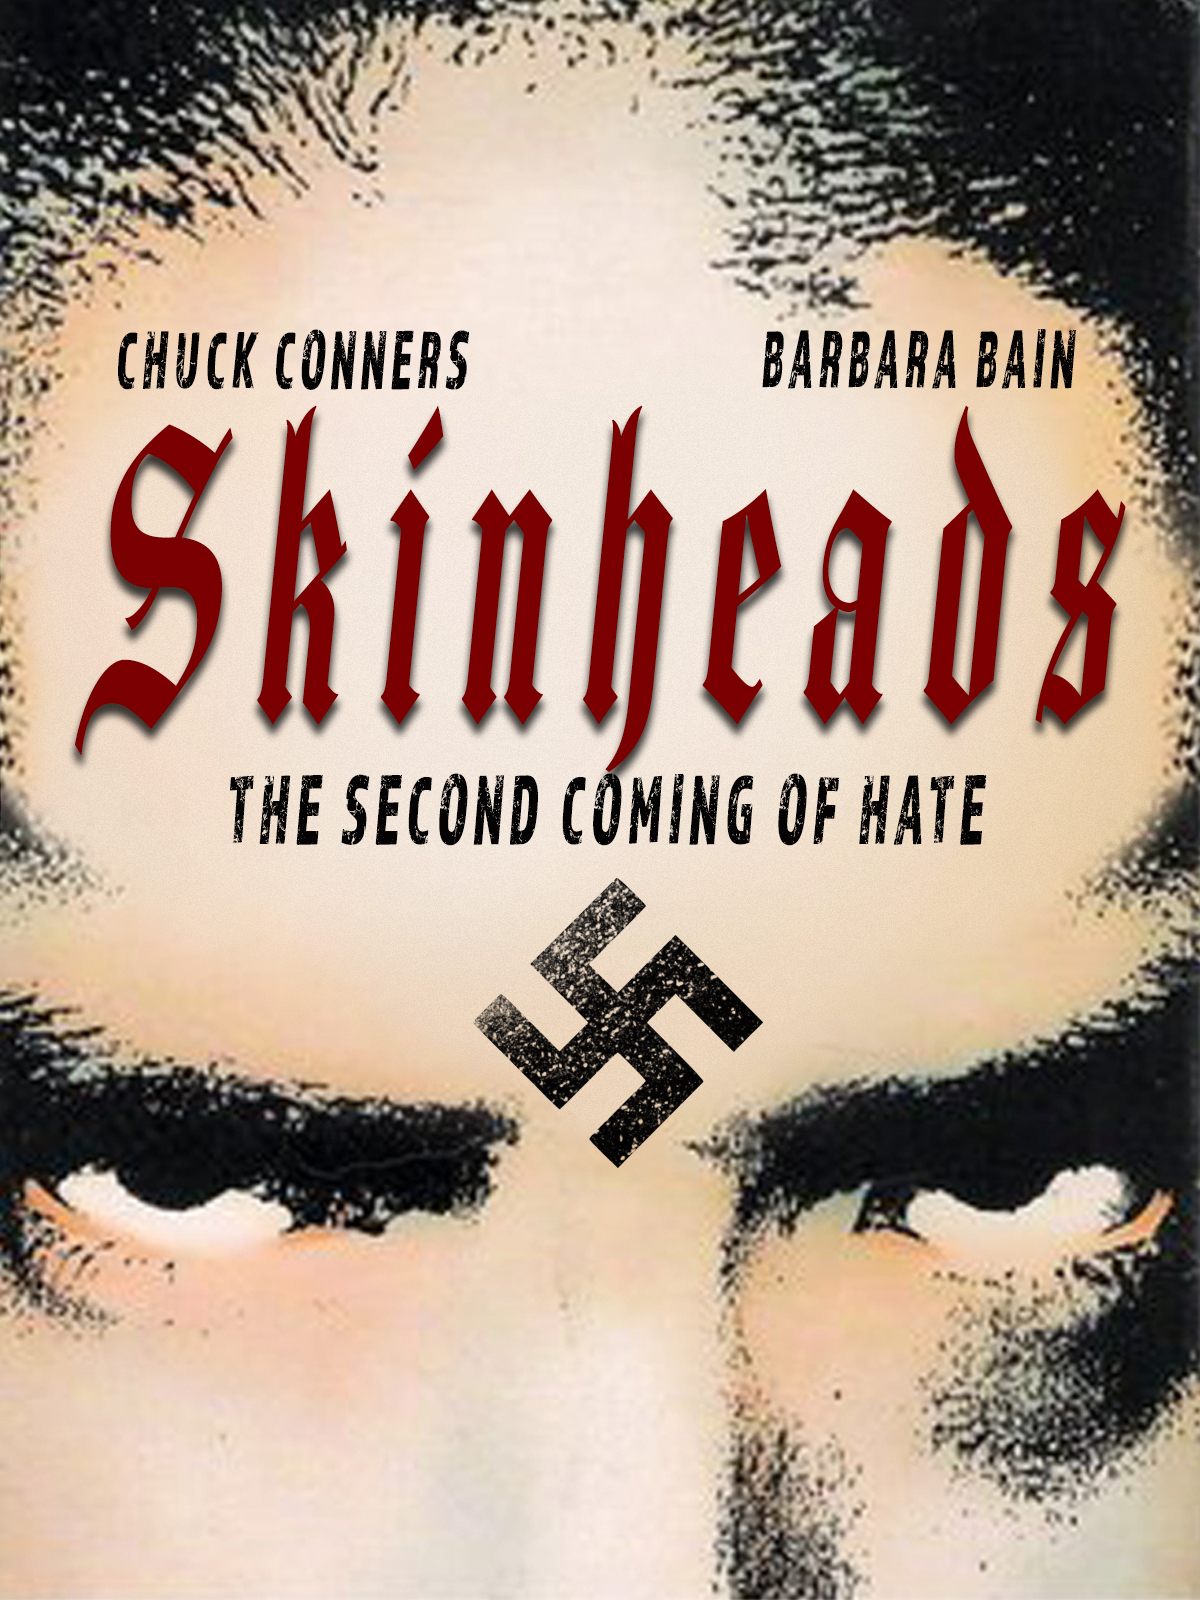 Skinheads (1989) starring Chuck Connors on DVD on DVD